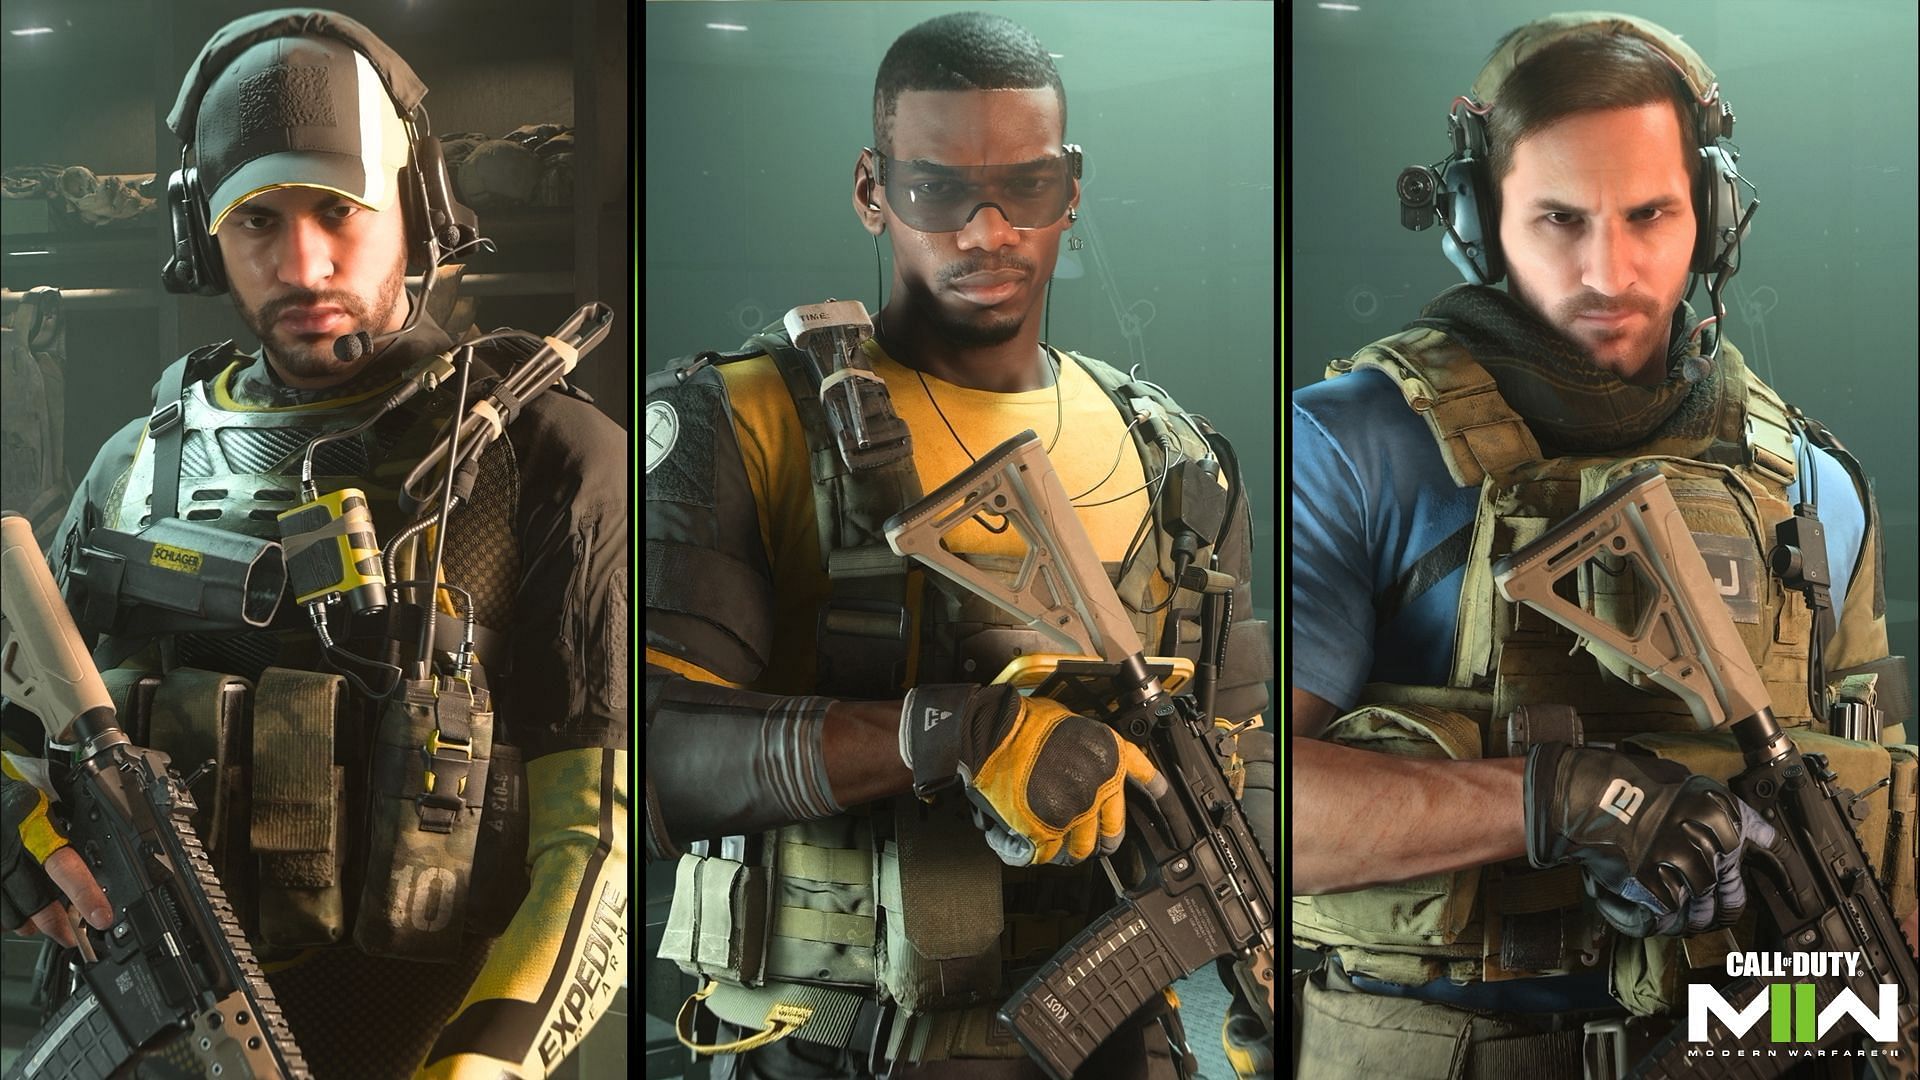 Paul Pogba will be one of the three operators to join Modern Warfare 2 and Warzone 2 (Image via Activision)